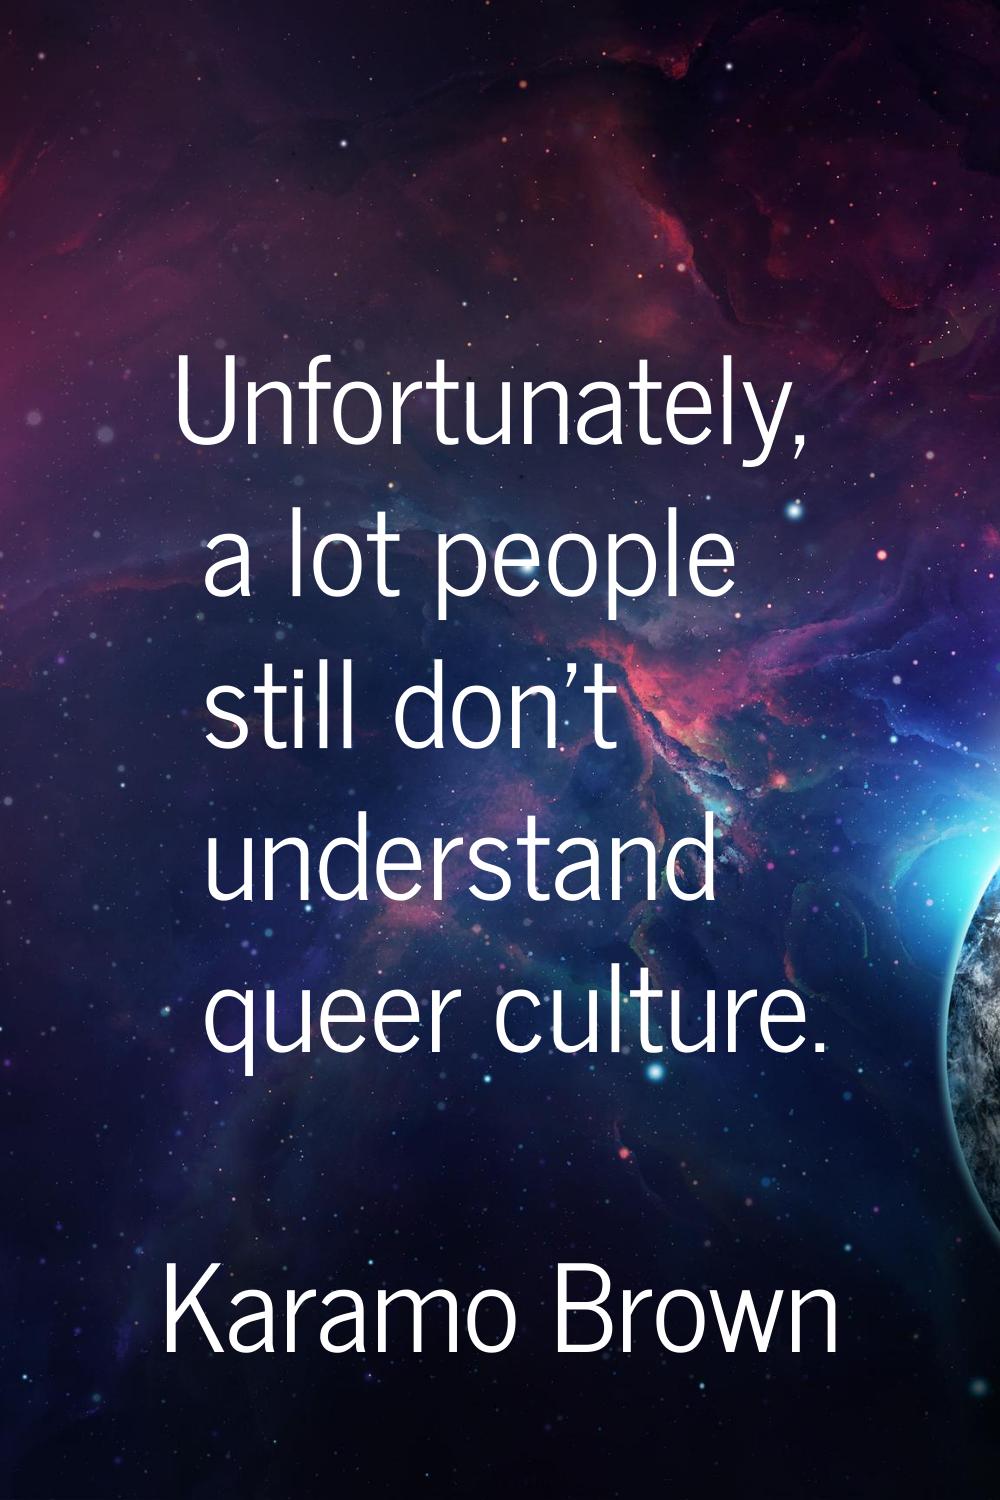 Unfortunately, a lot people still don't understand queer culture.